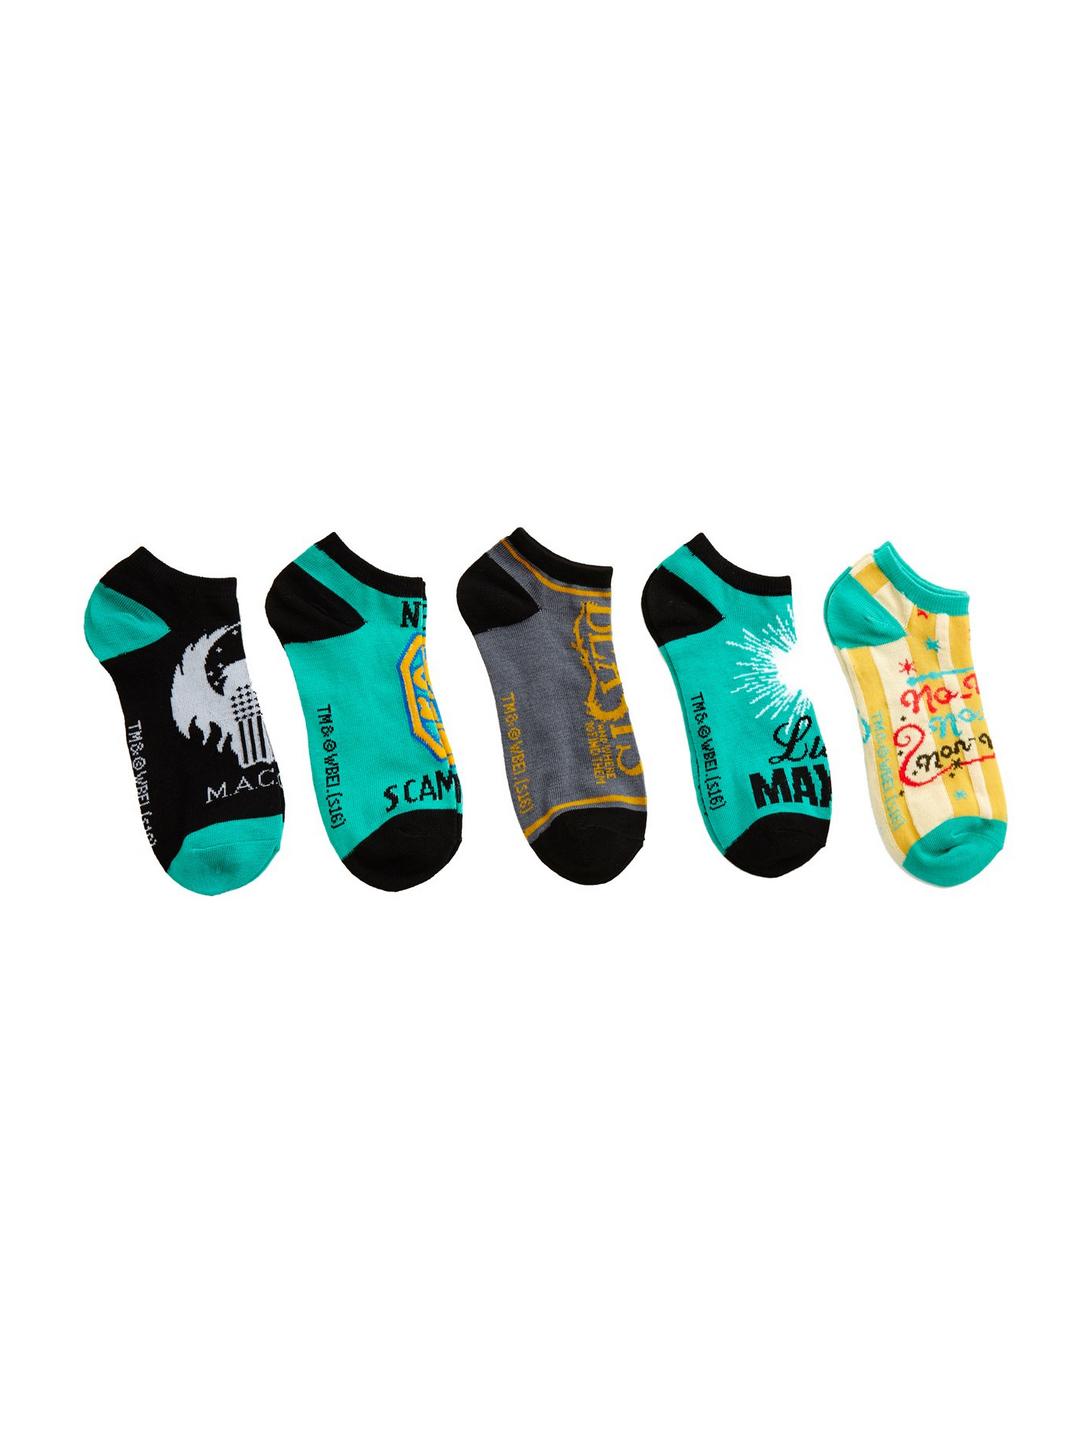 Fantastic Beasts And Where To Find Them No-Show Socks 5 Pair, , hi-res